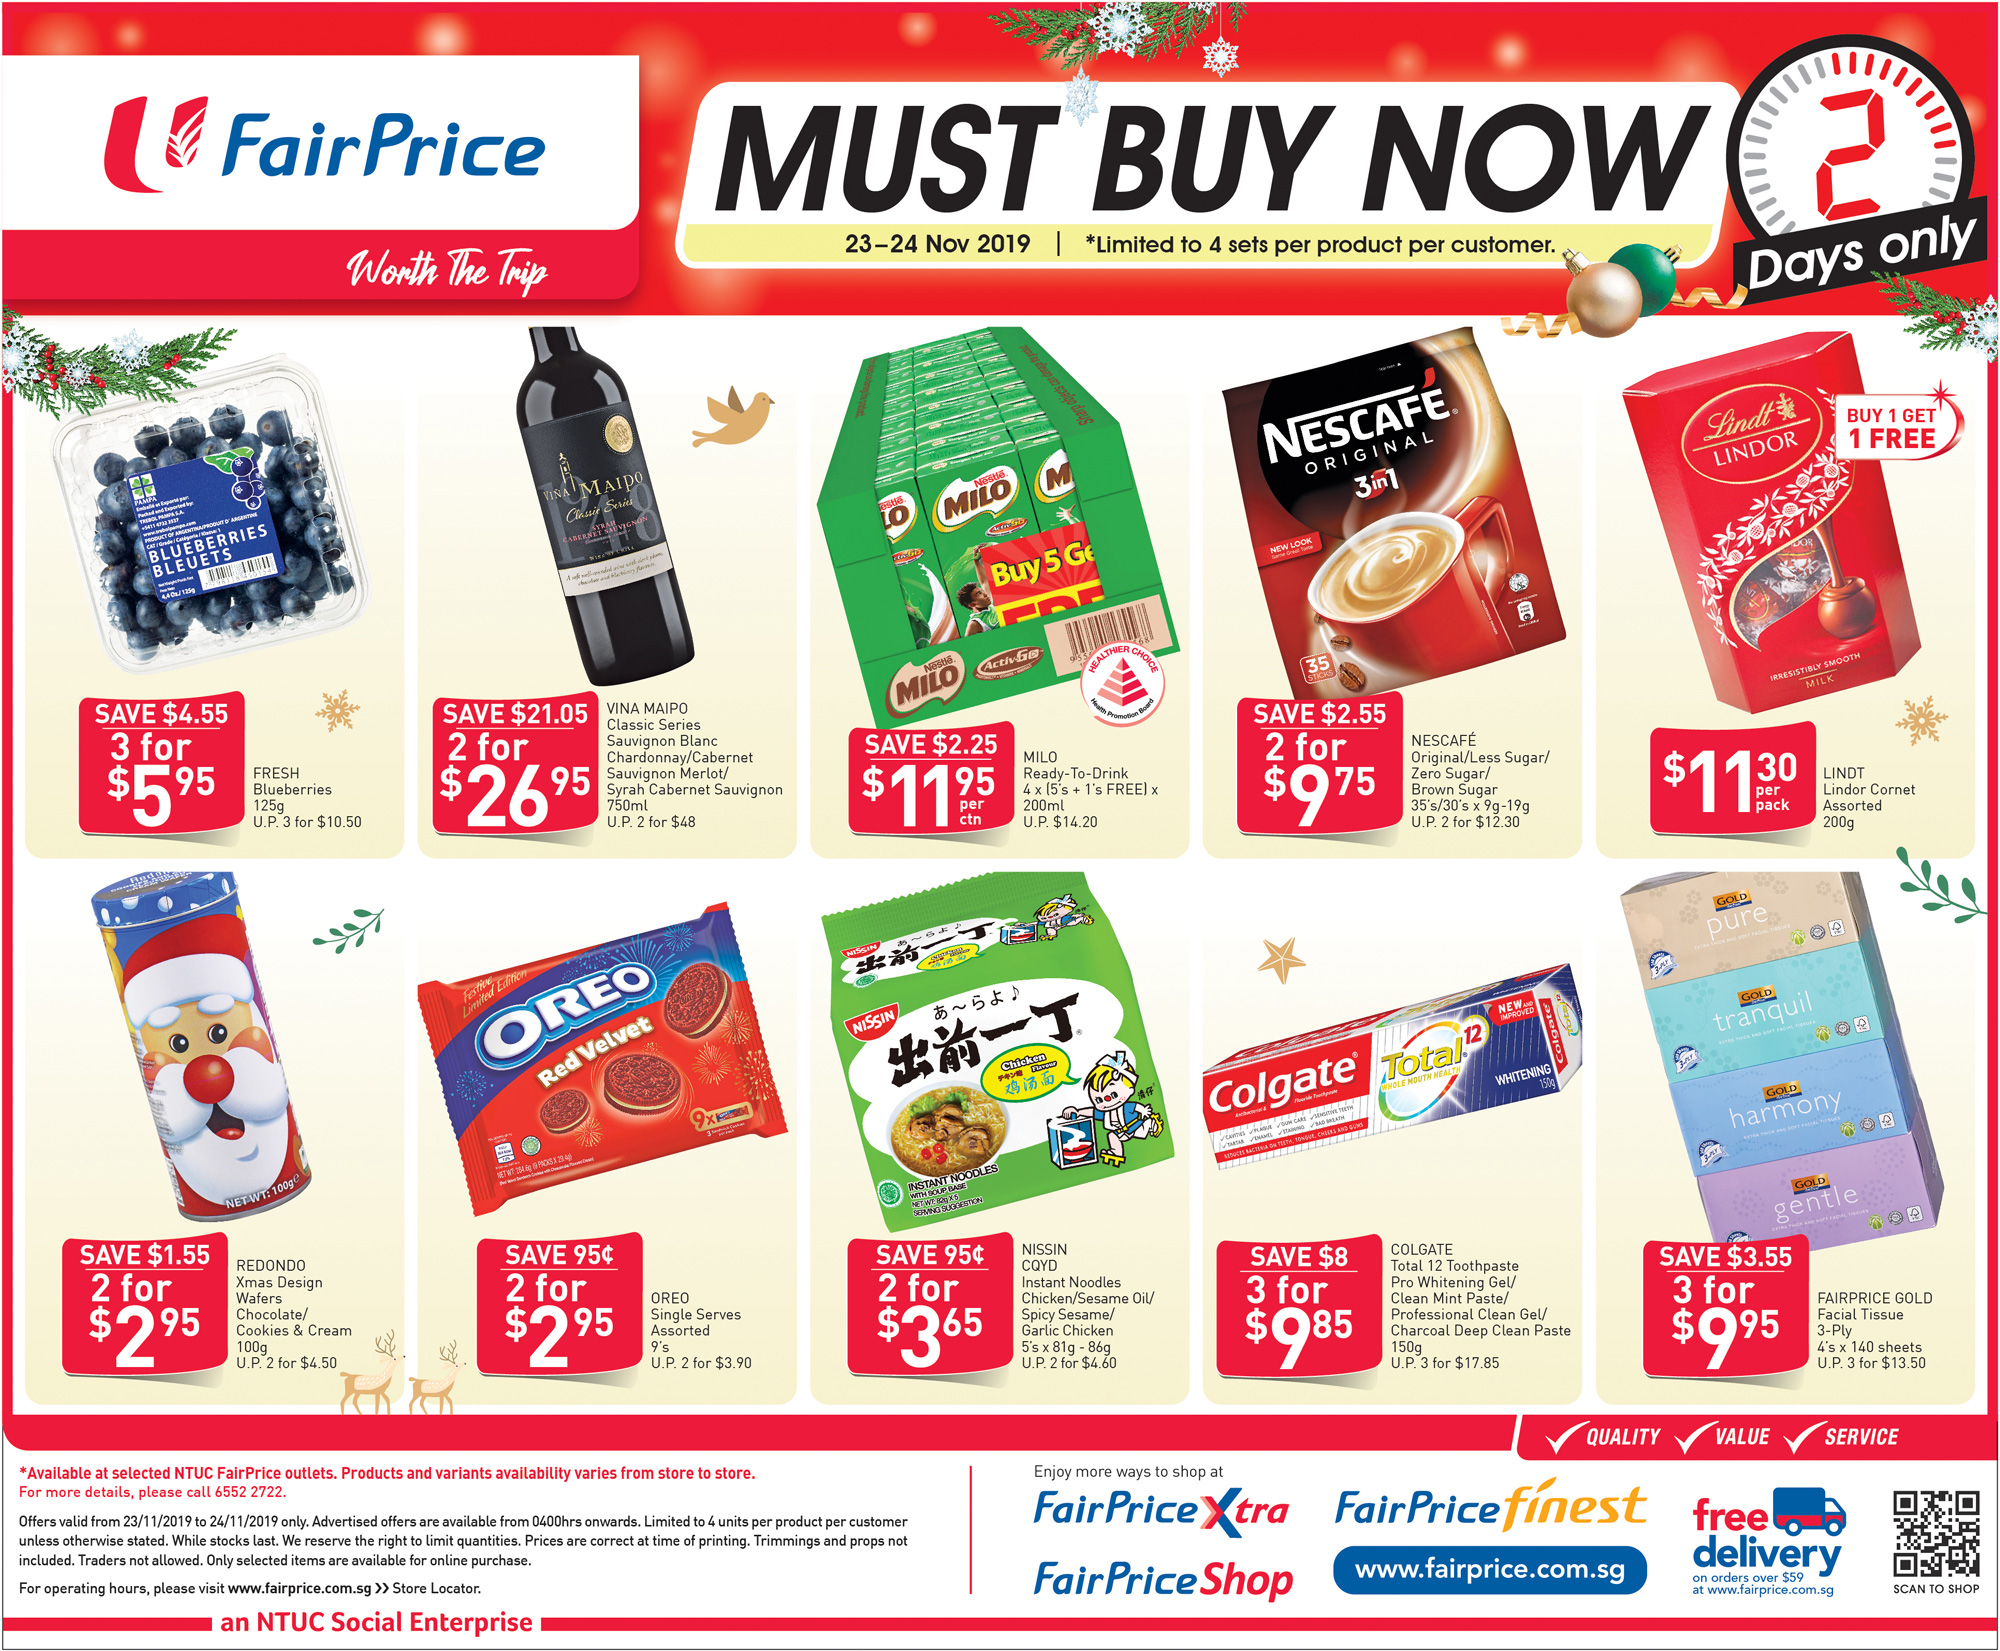 2 DAYS ONLY: FairPrice is offering 1-for-1 Lindt Lindor Cornet Chocolates, 2-for-$2.95 Oreo Red Velvet & more from 23 – 24 Nov 19 - 2